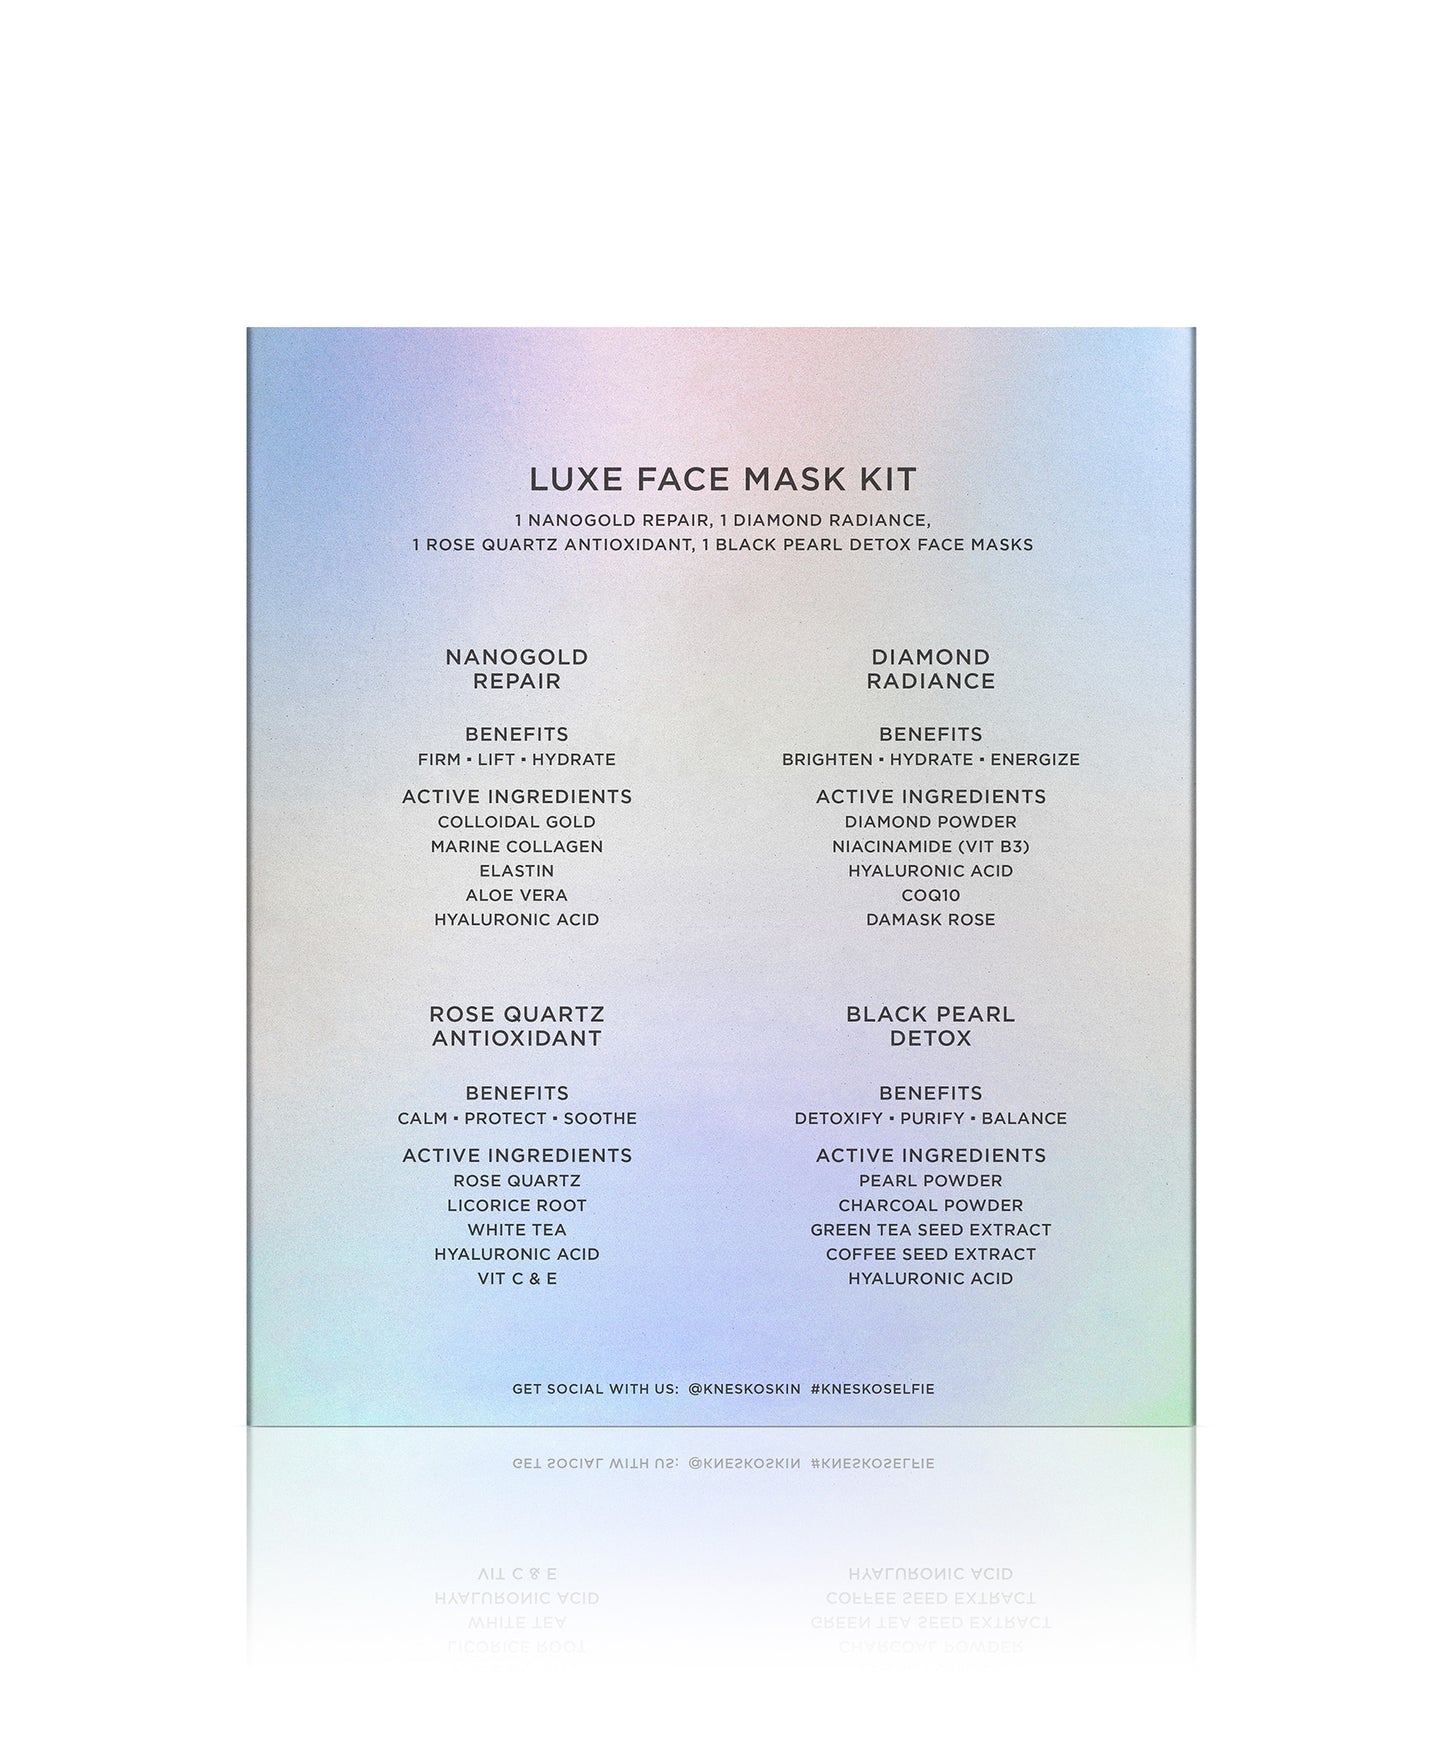 Back of the The Luxe Mask Face Kit box.